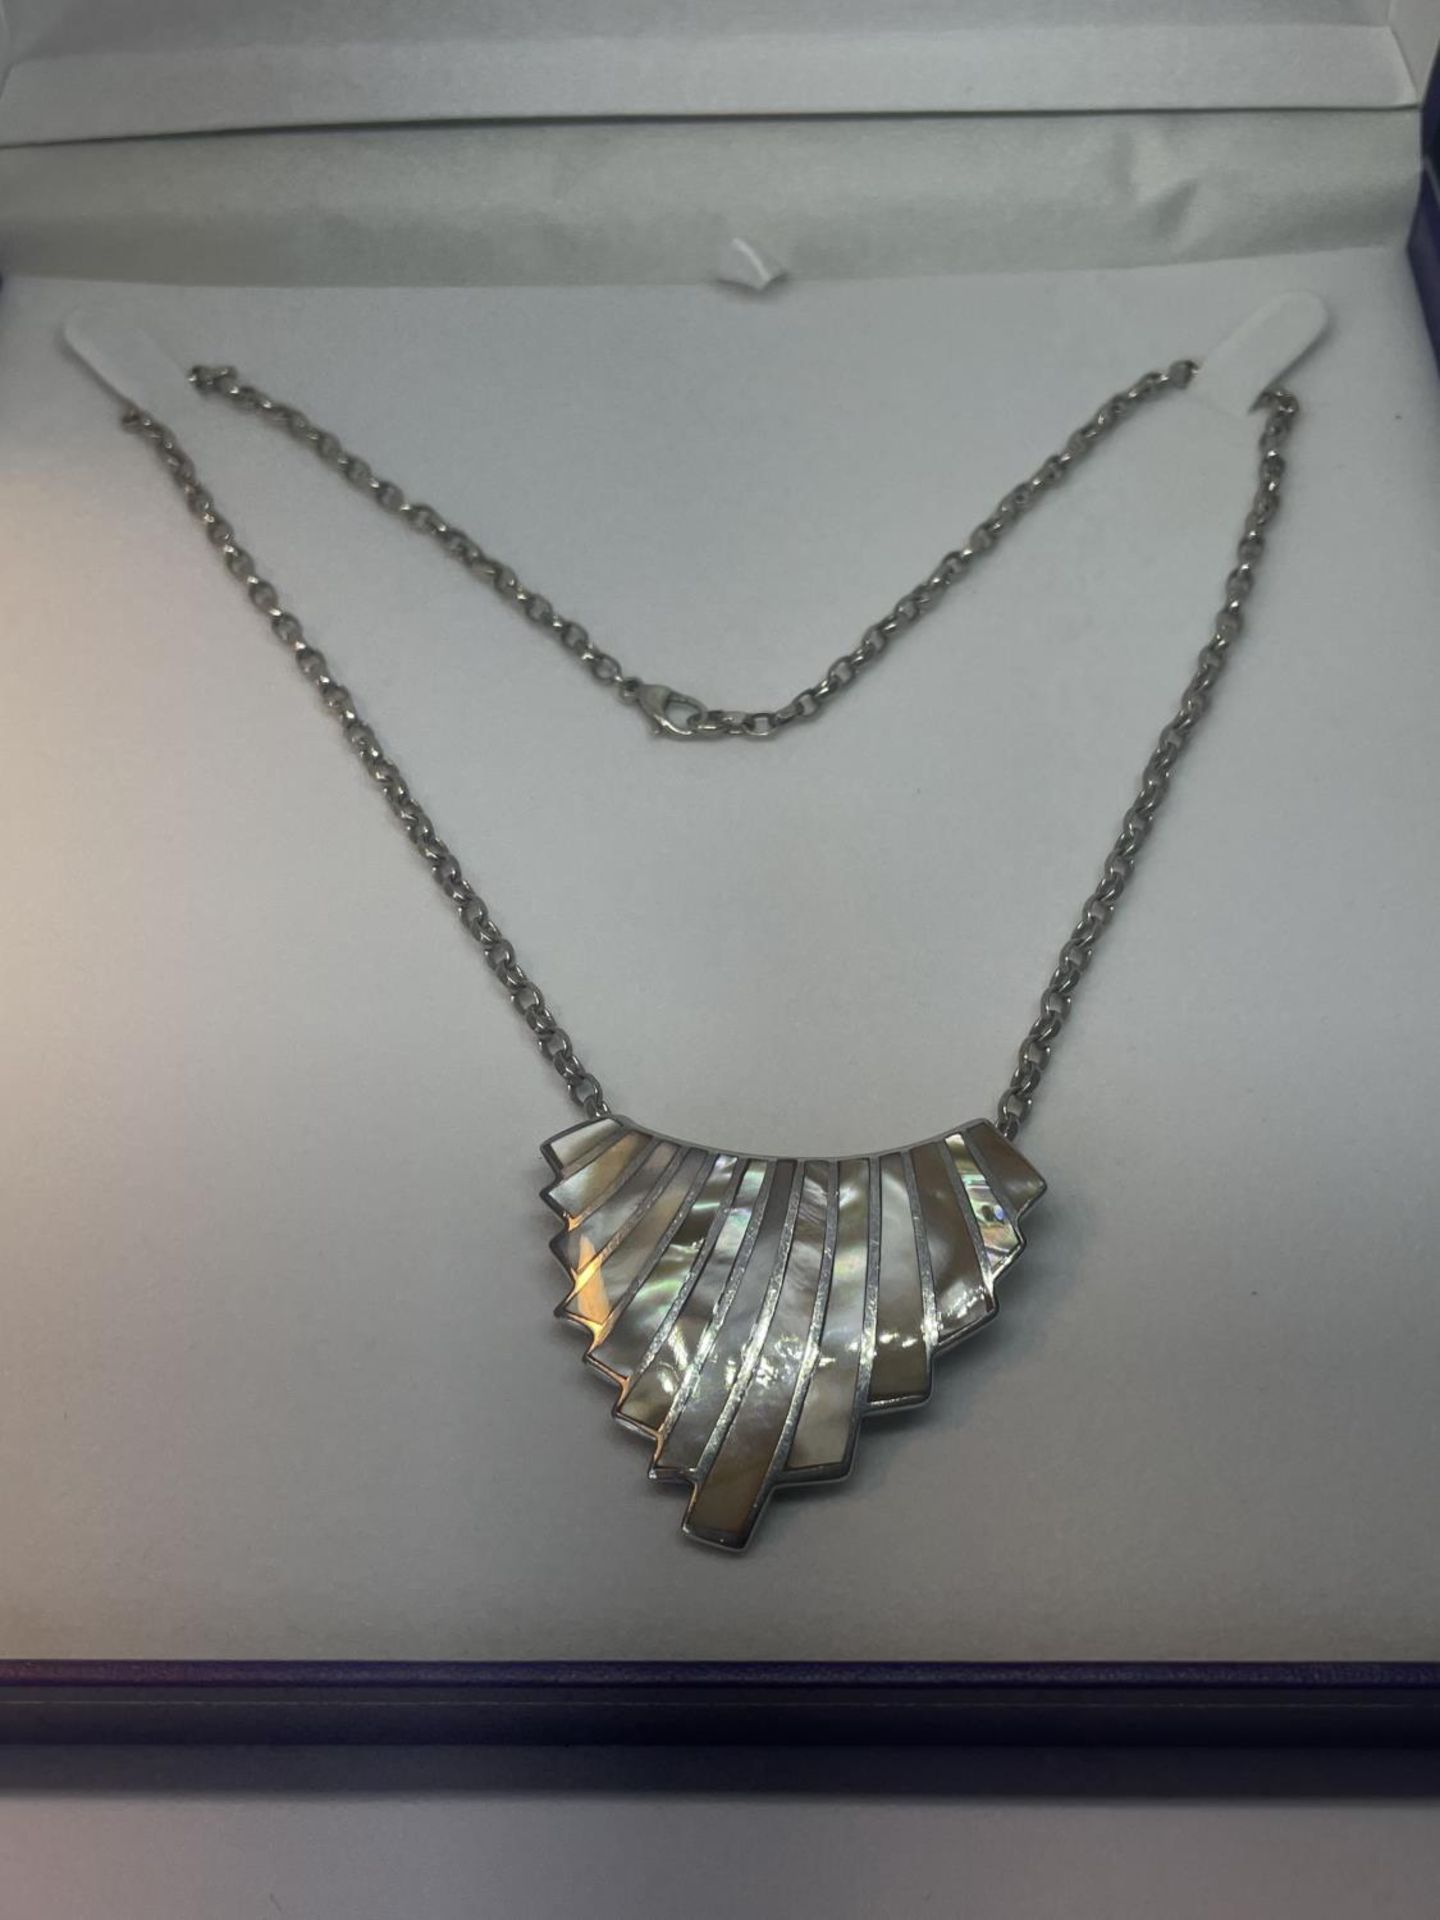 A MARKED SILVER DECO STYLE NECKLACE IN A PRESENTATION BOX